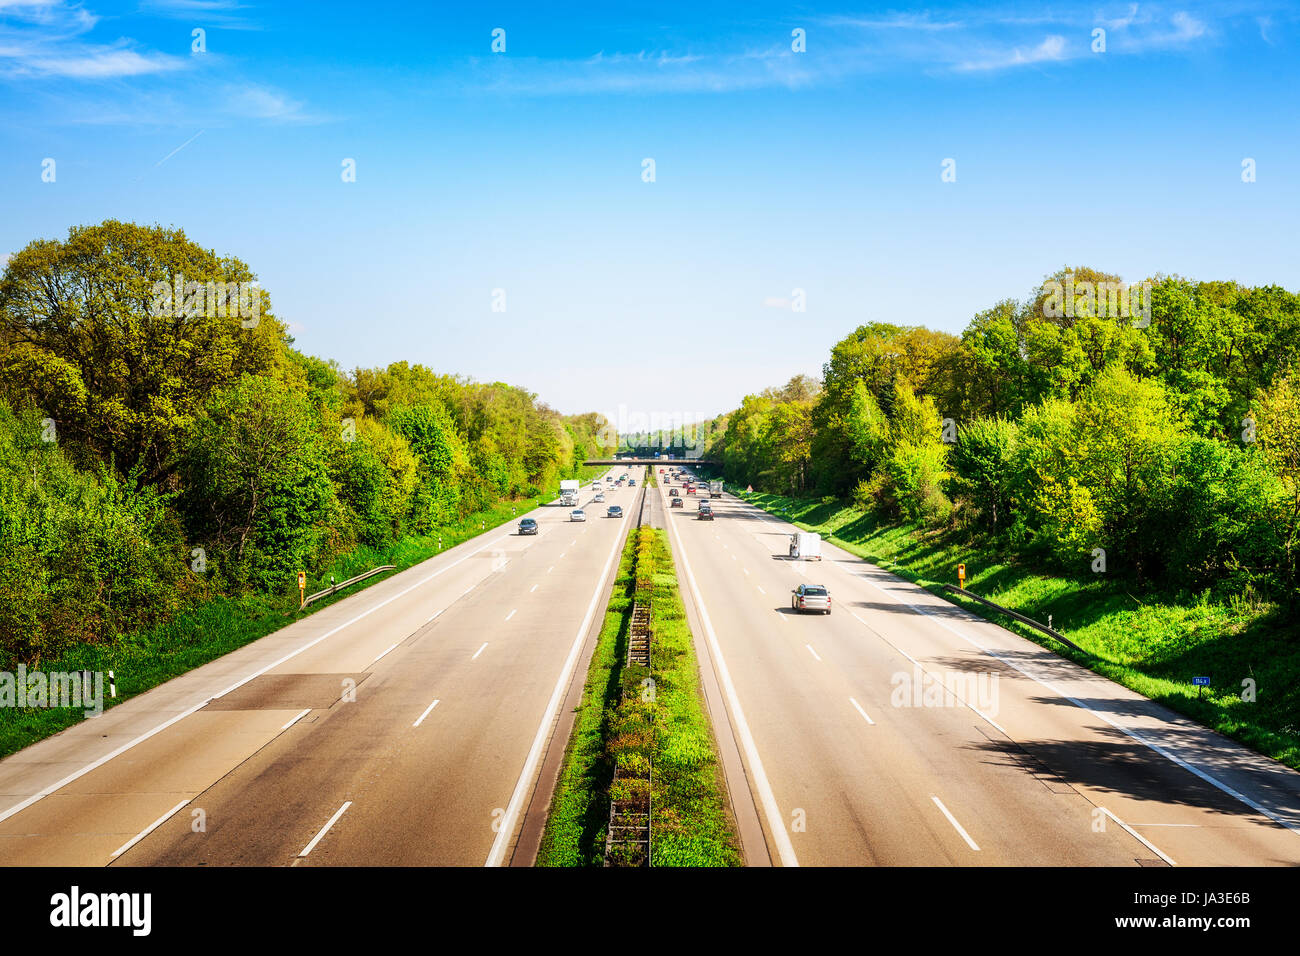 Highway traffic with cars and trucks on sunny spring day, Germany Stock Photo